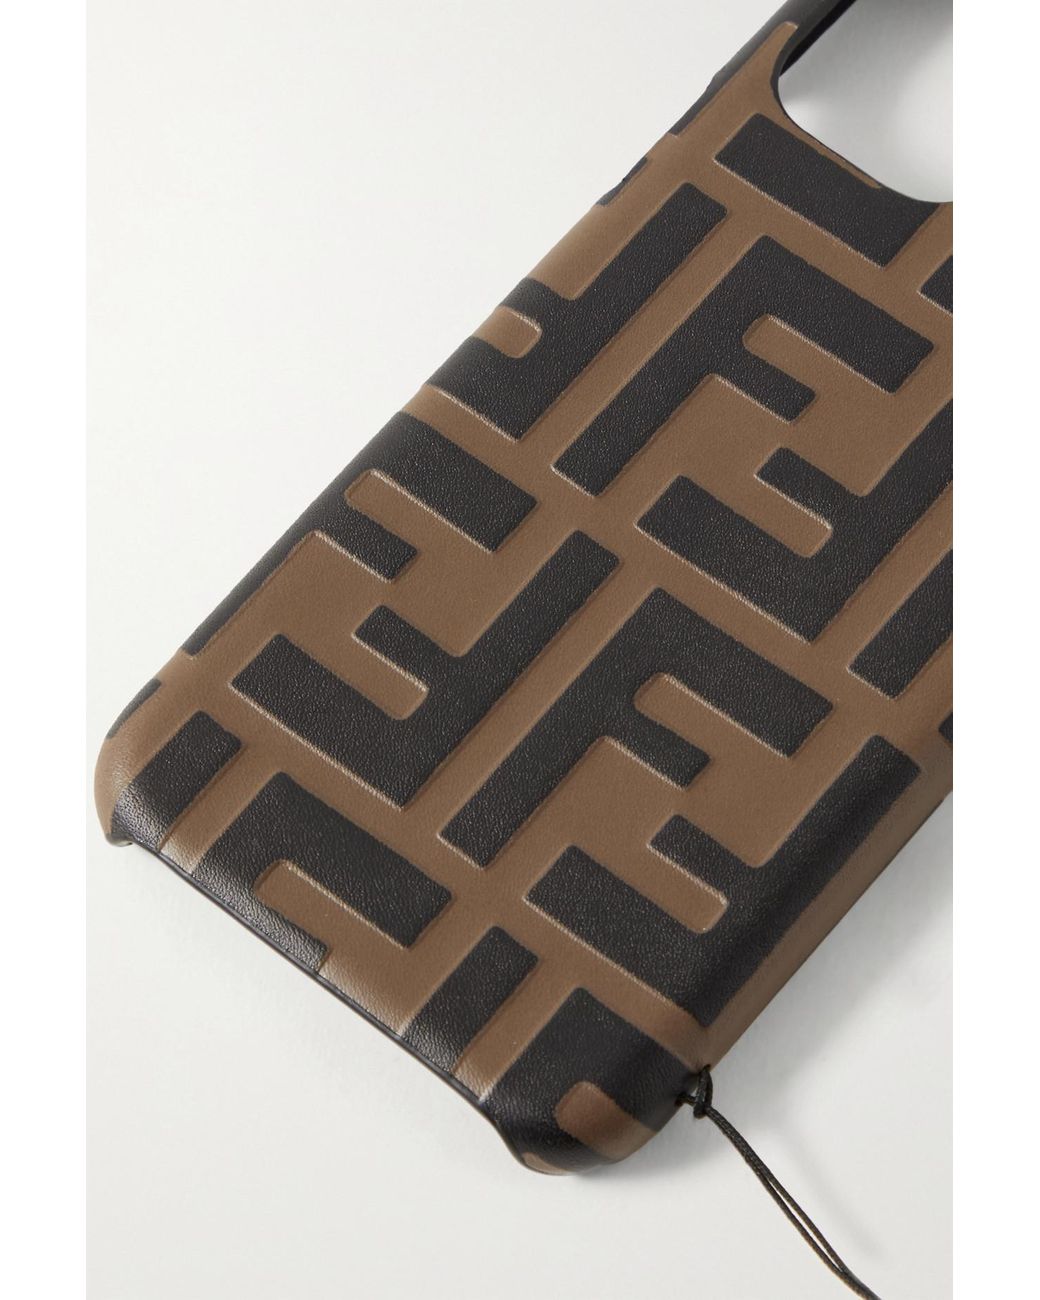 Fendi Canvas-trimmed Embossed Leather Iphone 11 Pro Case in Brown | Lyst